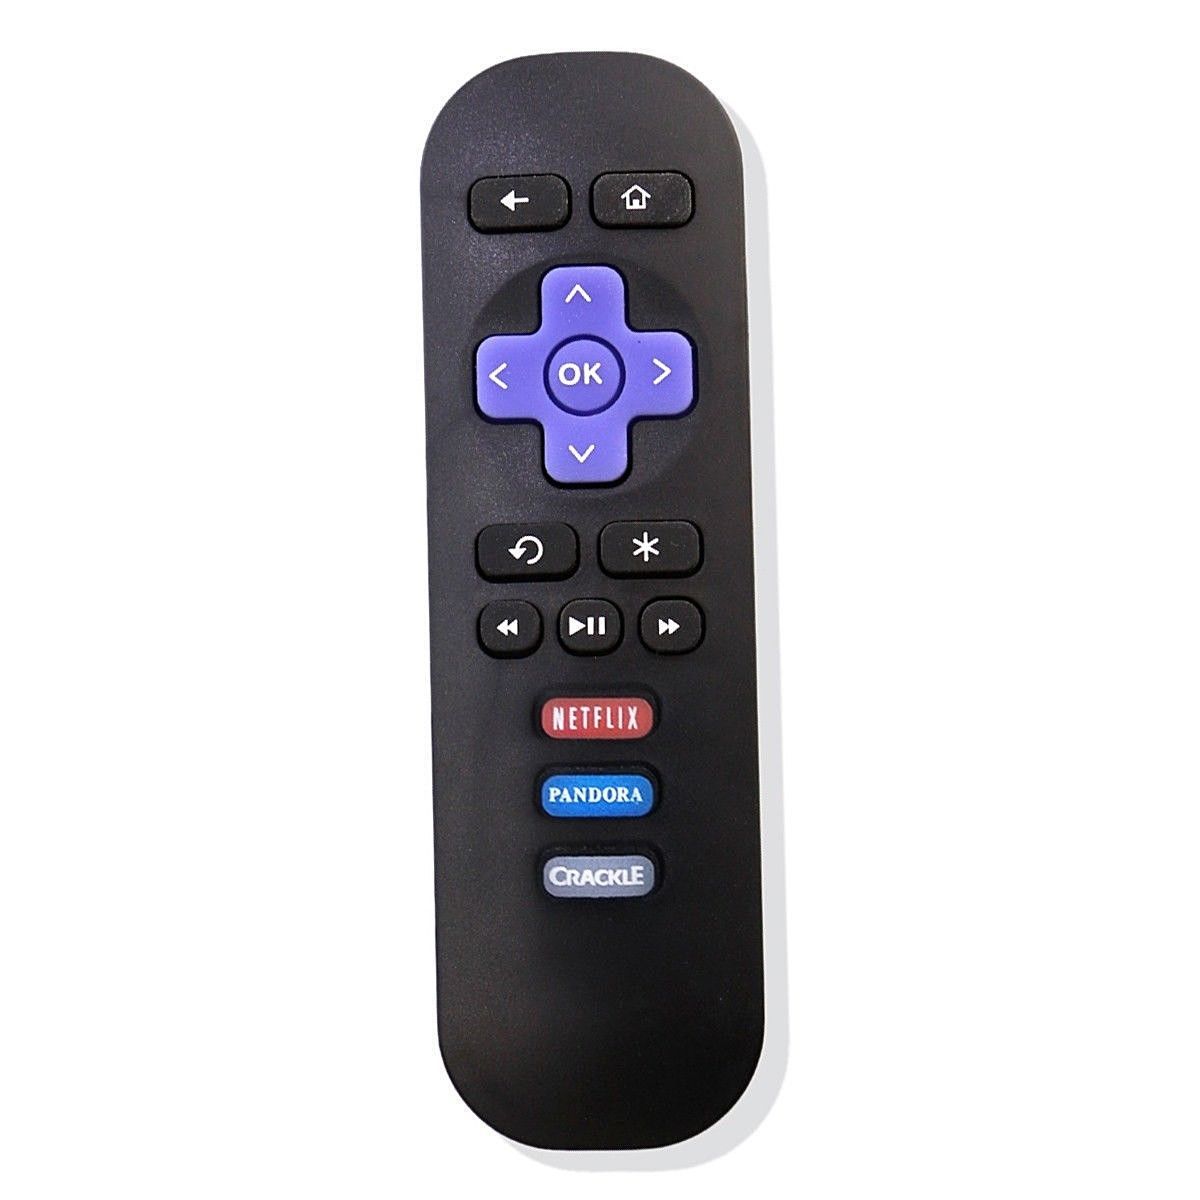 Replacement Remote Control for Roku 1 2 3 4 LT HD XD XS w Instant Reply 3 Shortcut keys